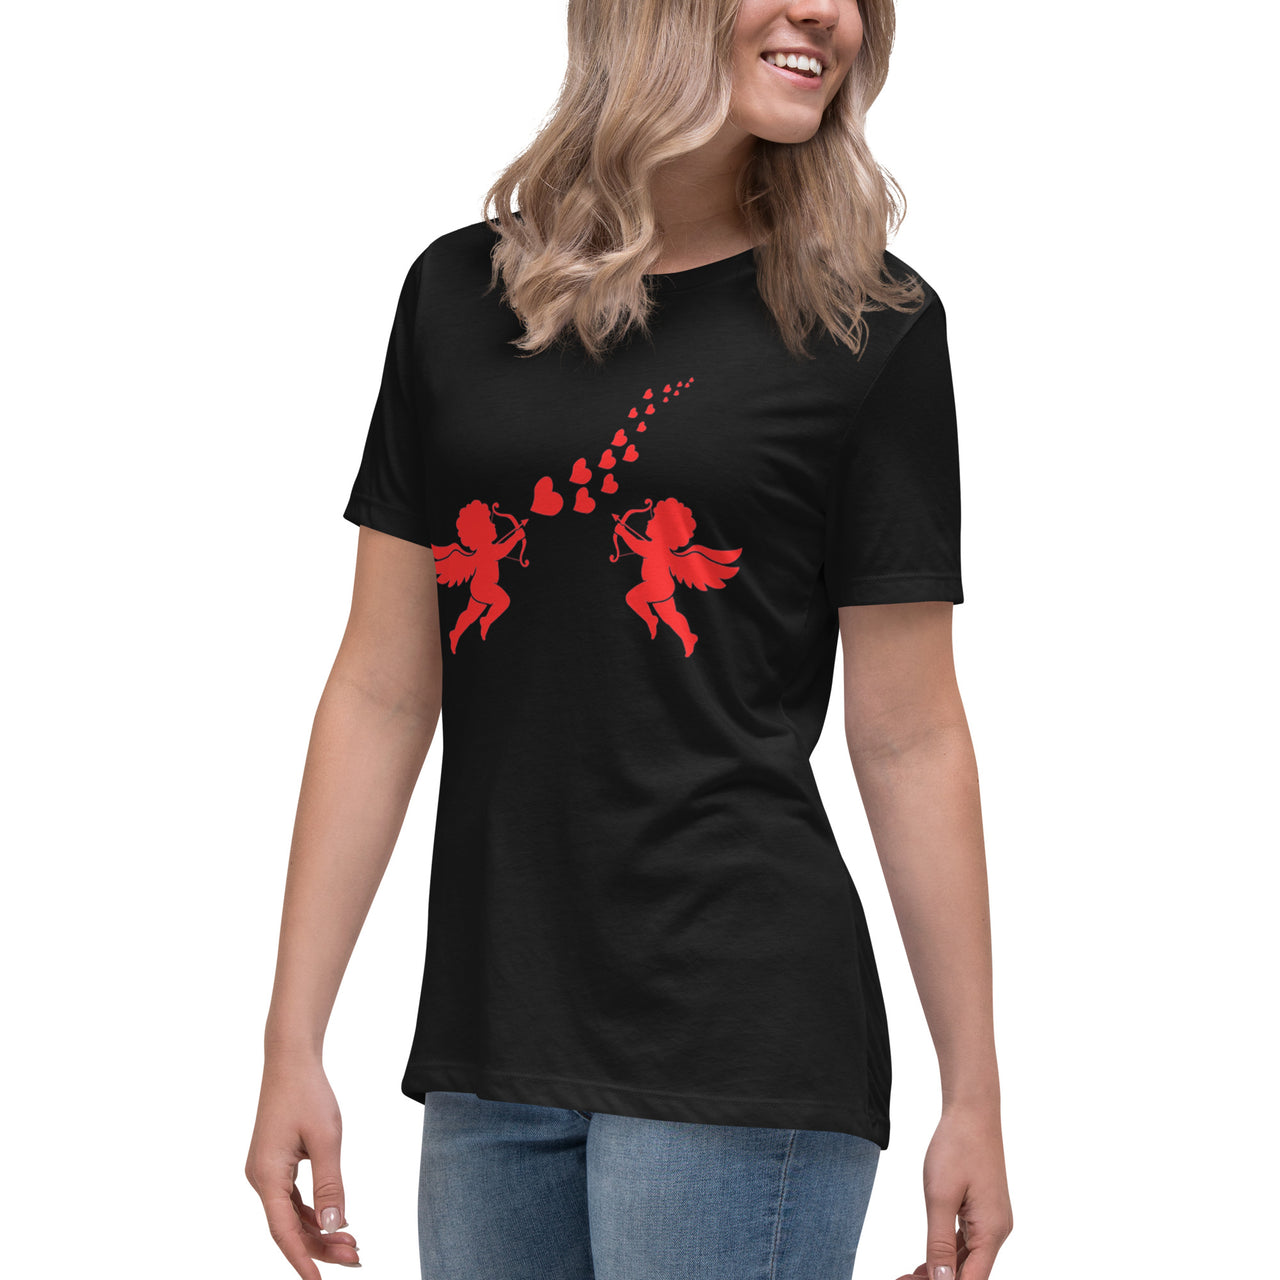 Red Cupid Angel Valentine's Day Hearts Womens T-Shirt